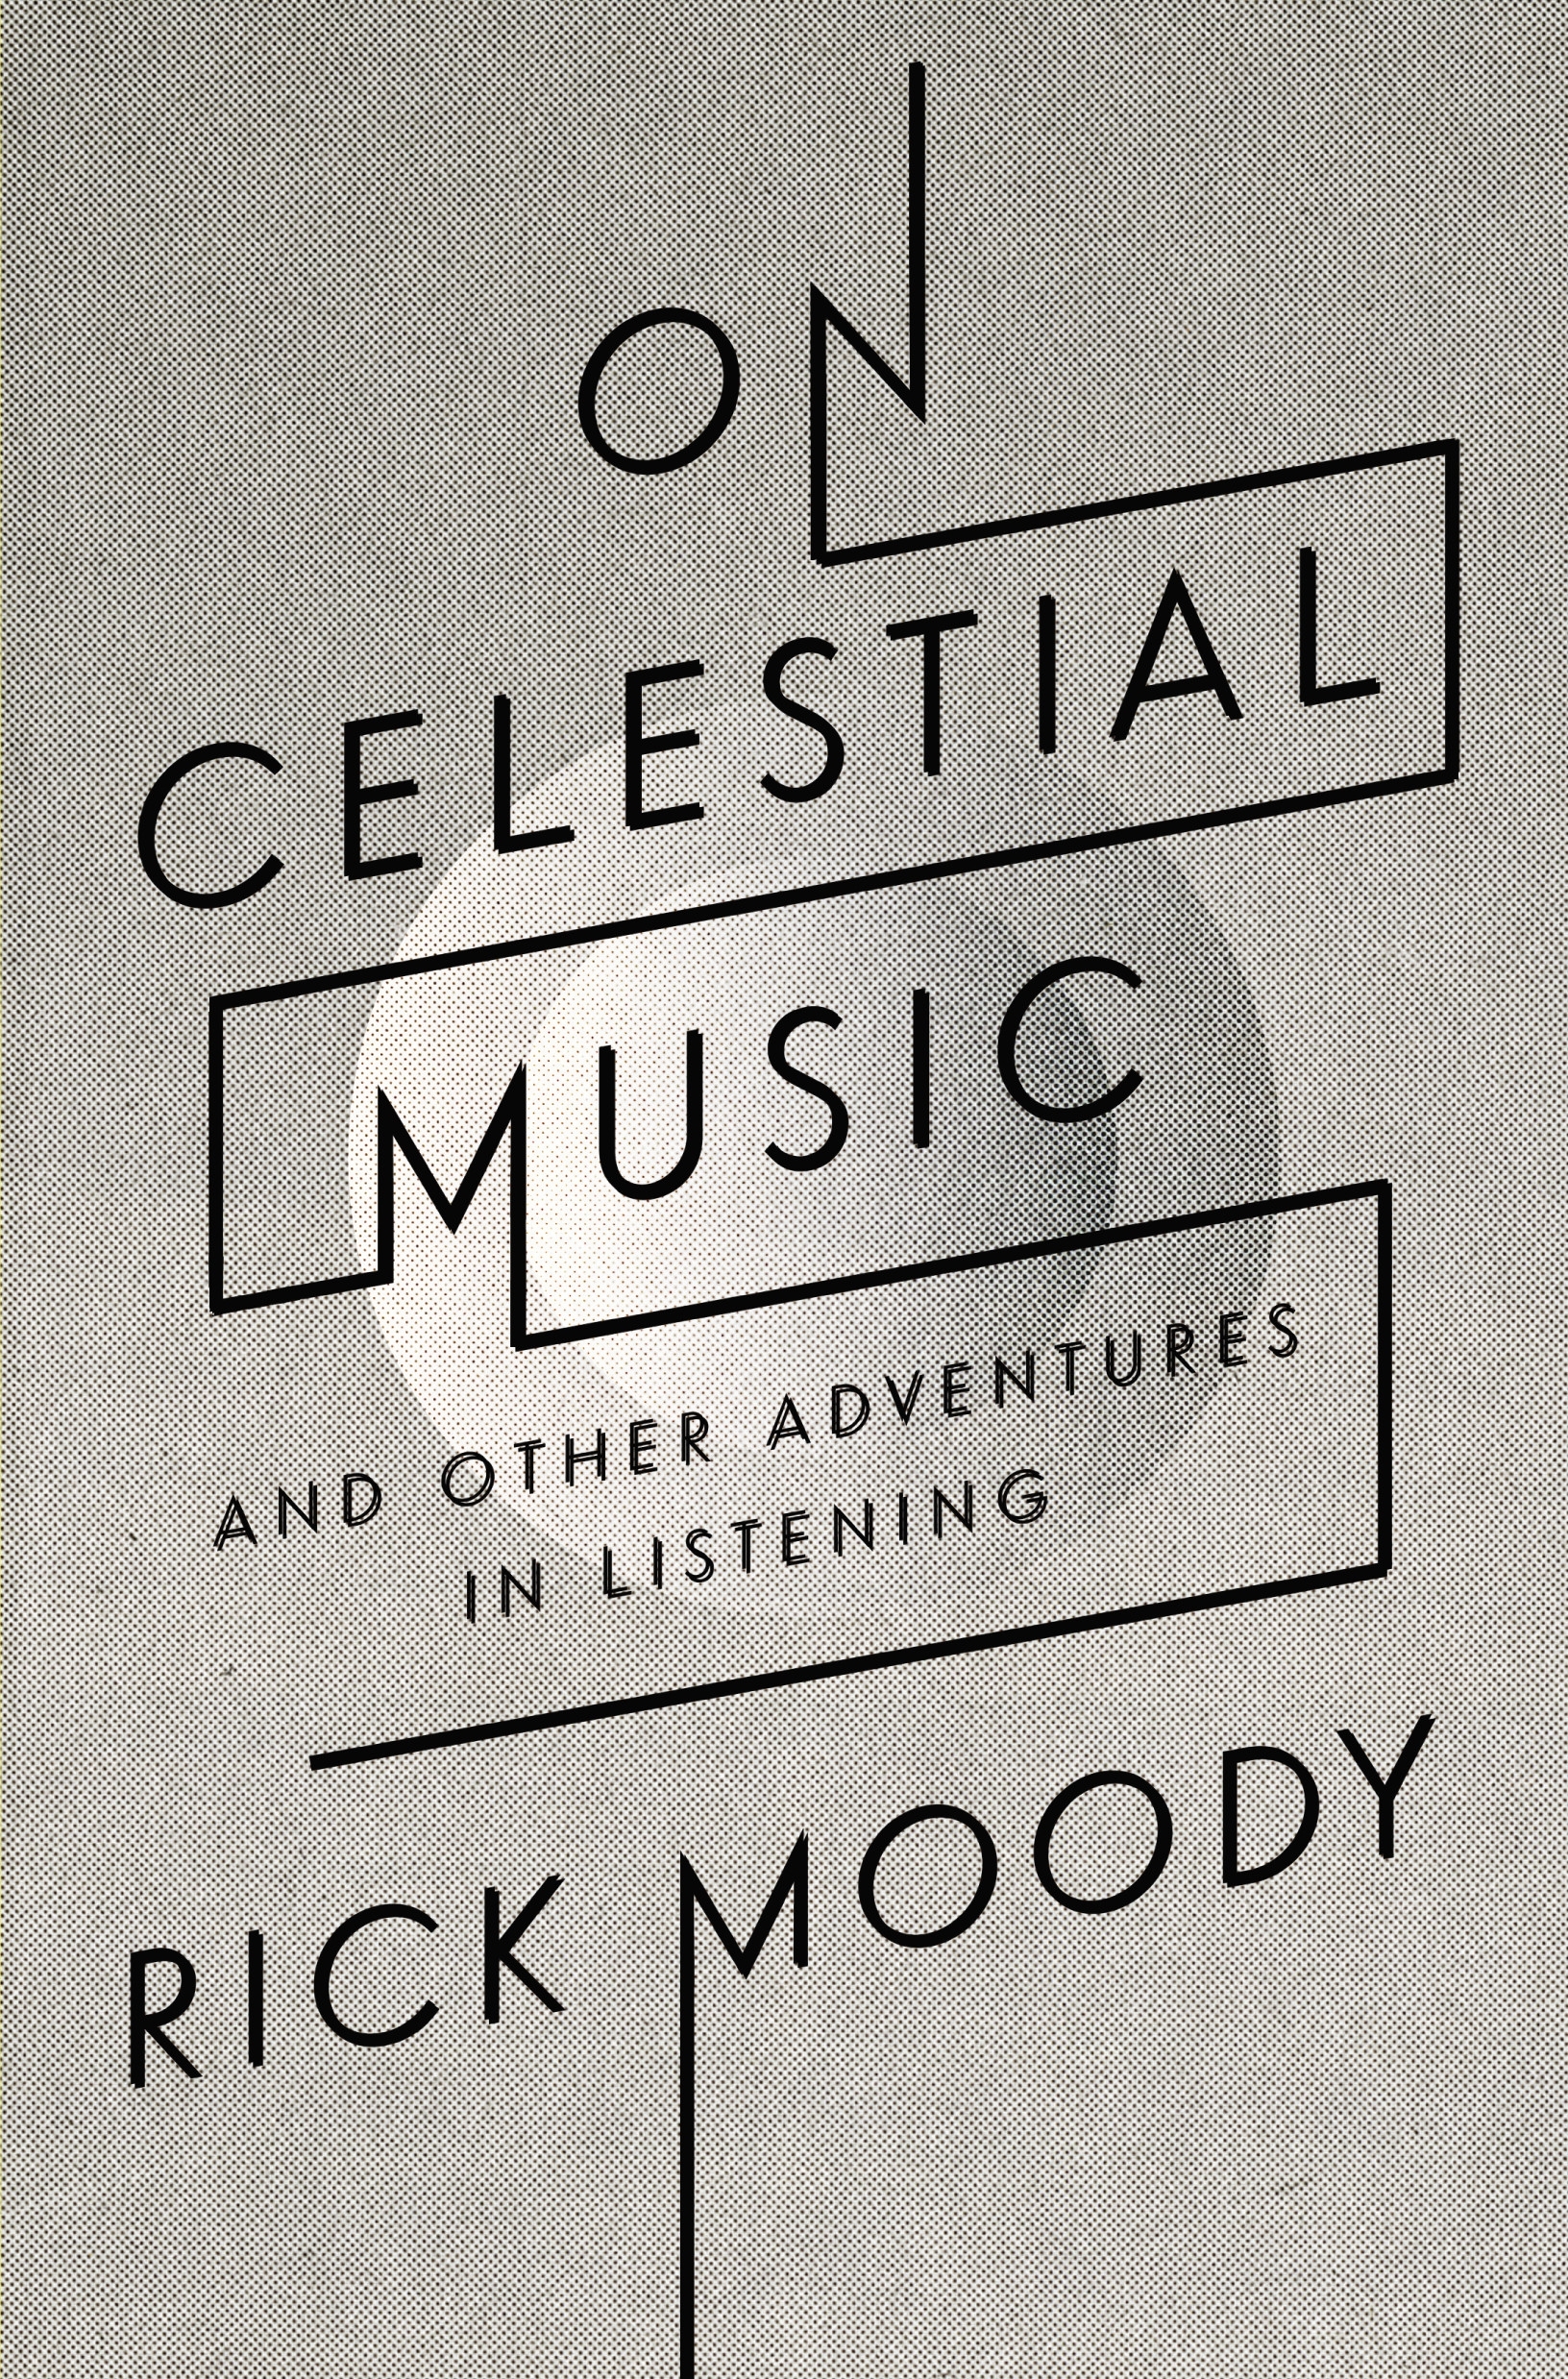 On Celestial Music by Rick Moody